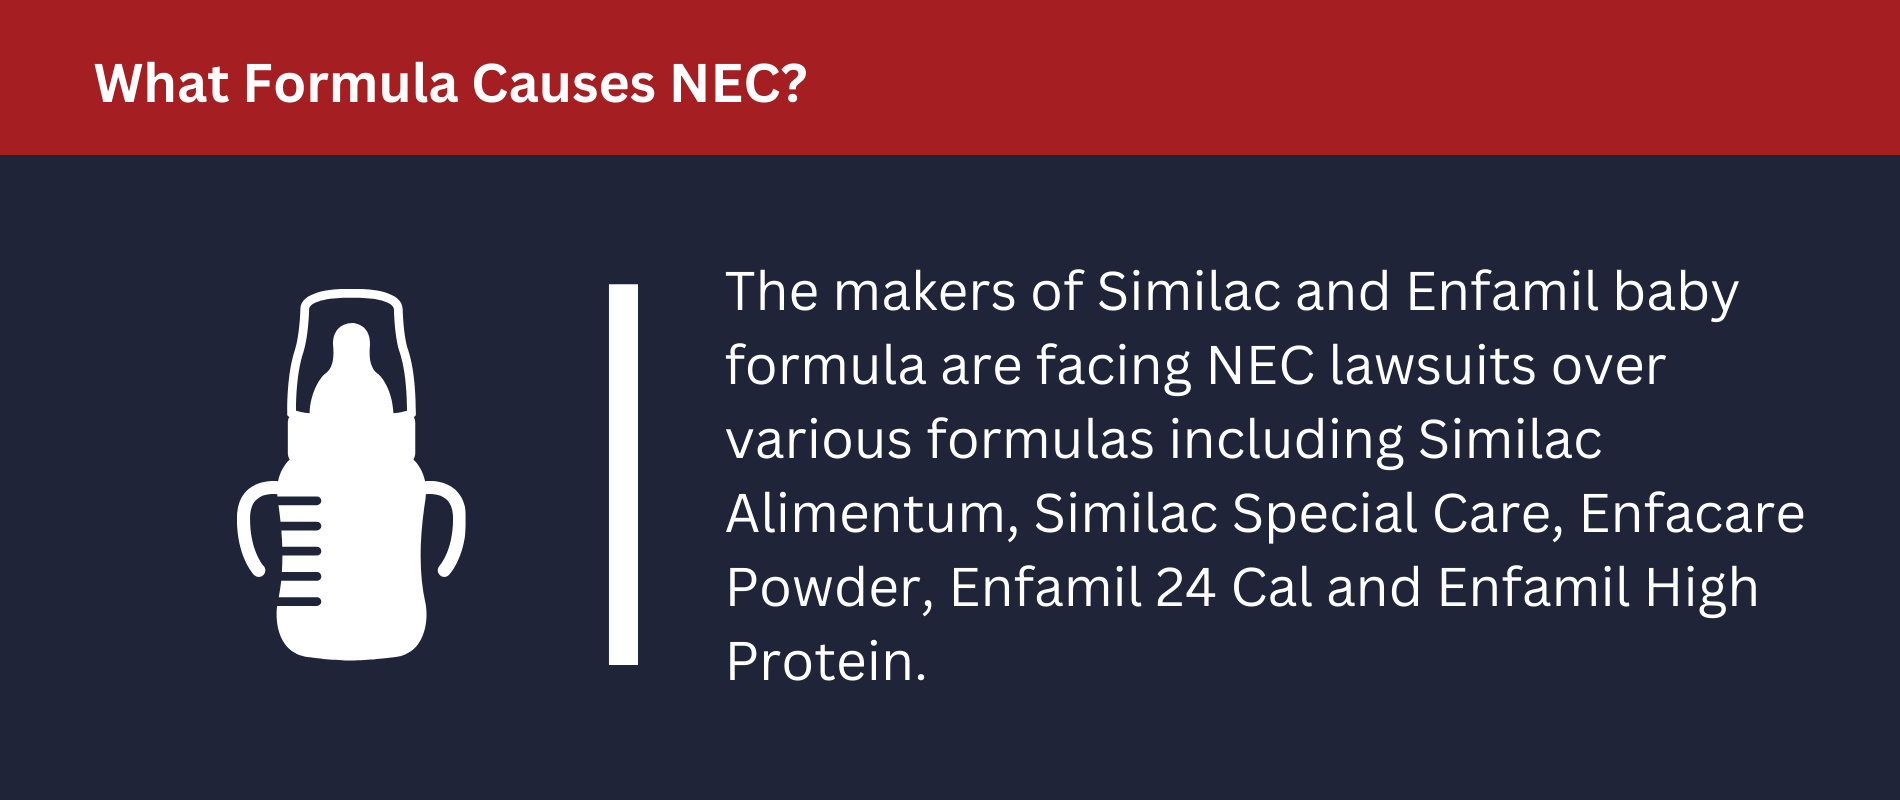 What Formula Causes NEC? The makers of Similac and Enfamil are facing lawsuits.